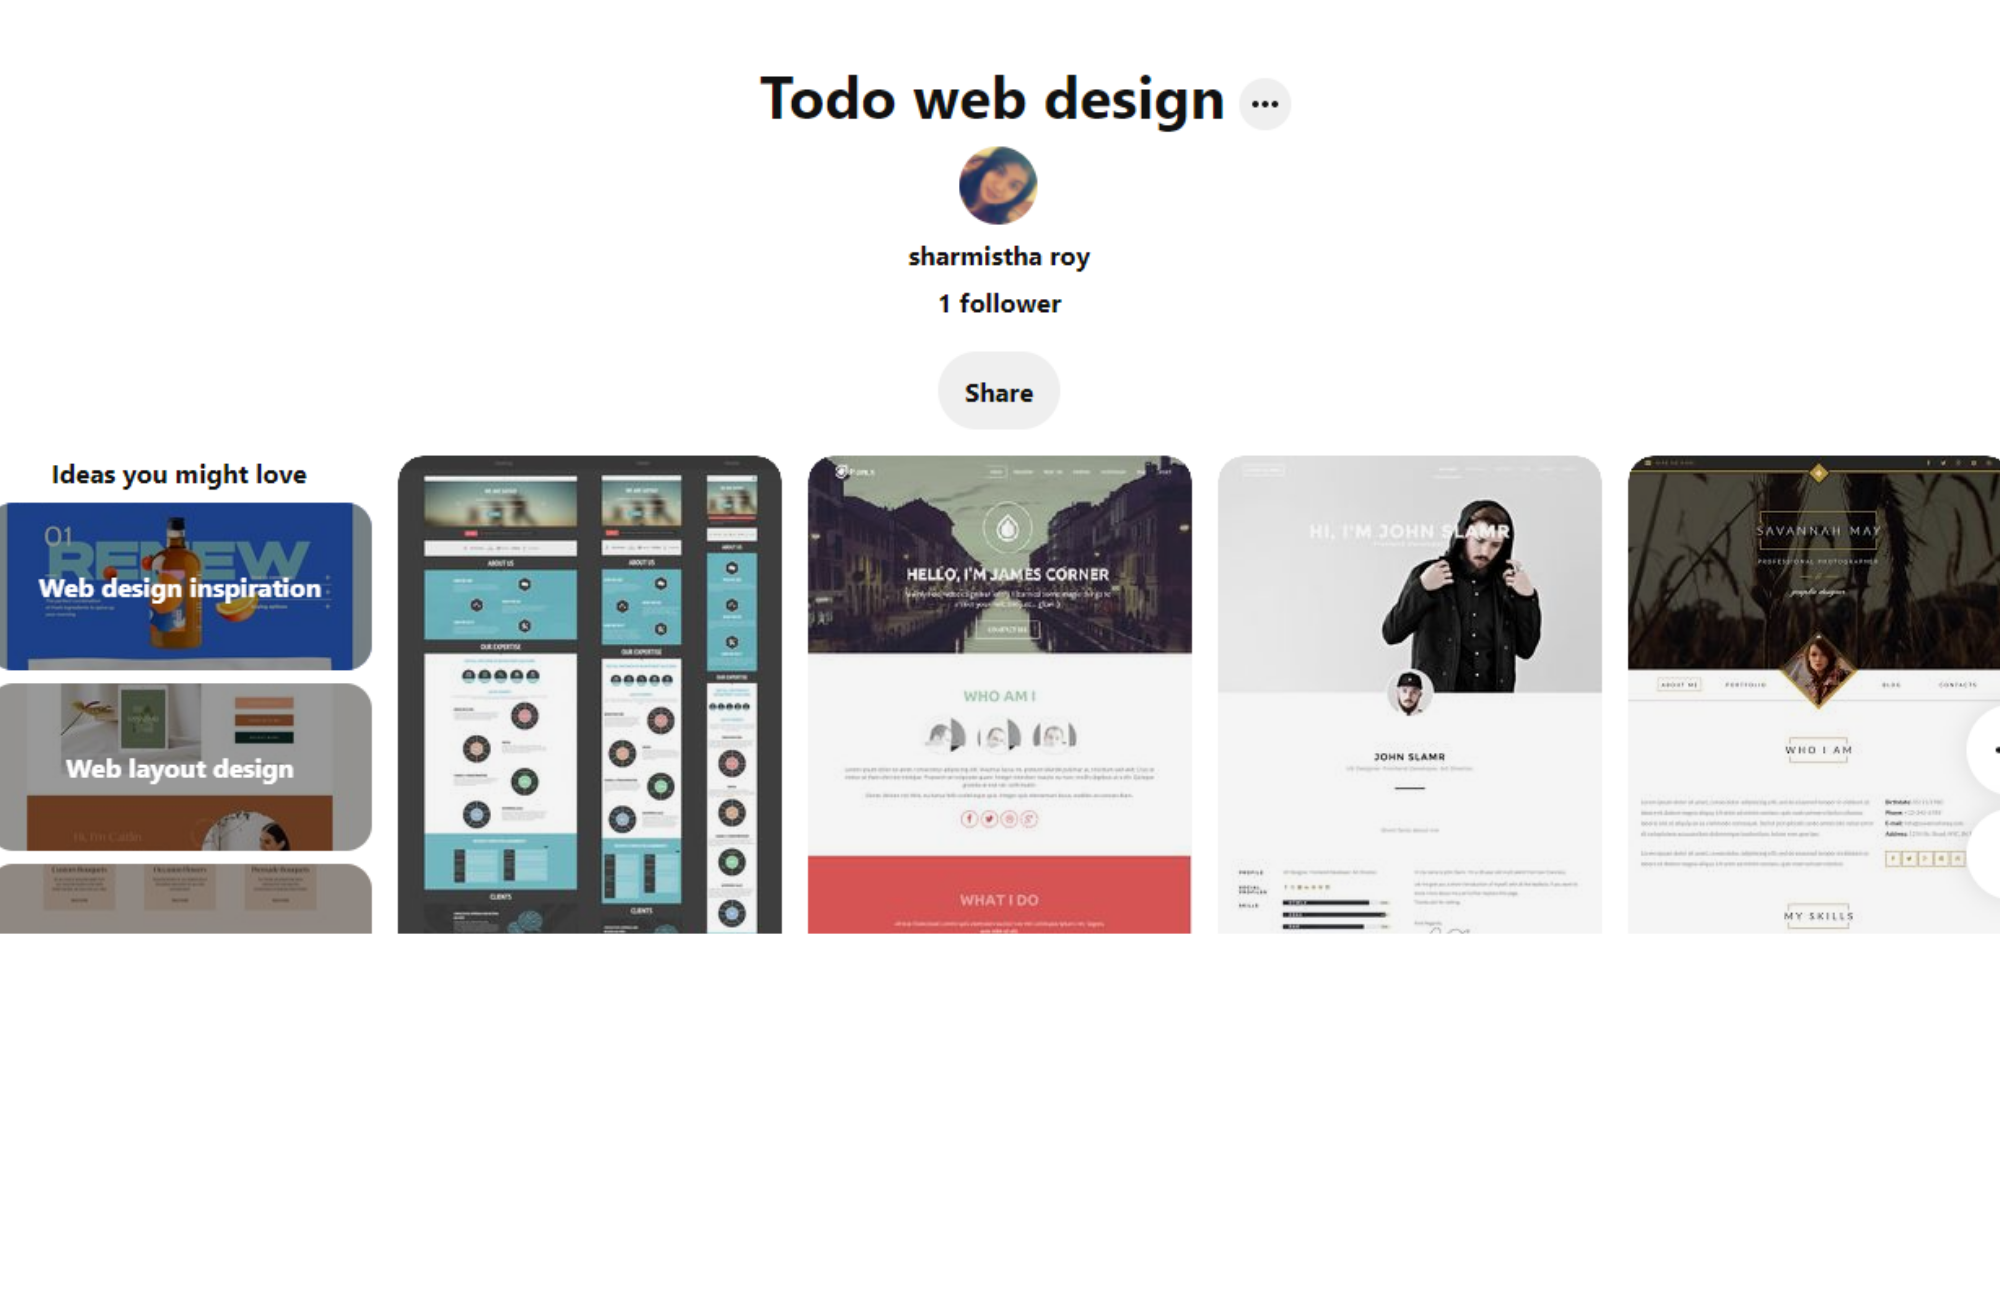 Todo web design examples with other ideas incorporated